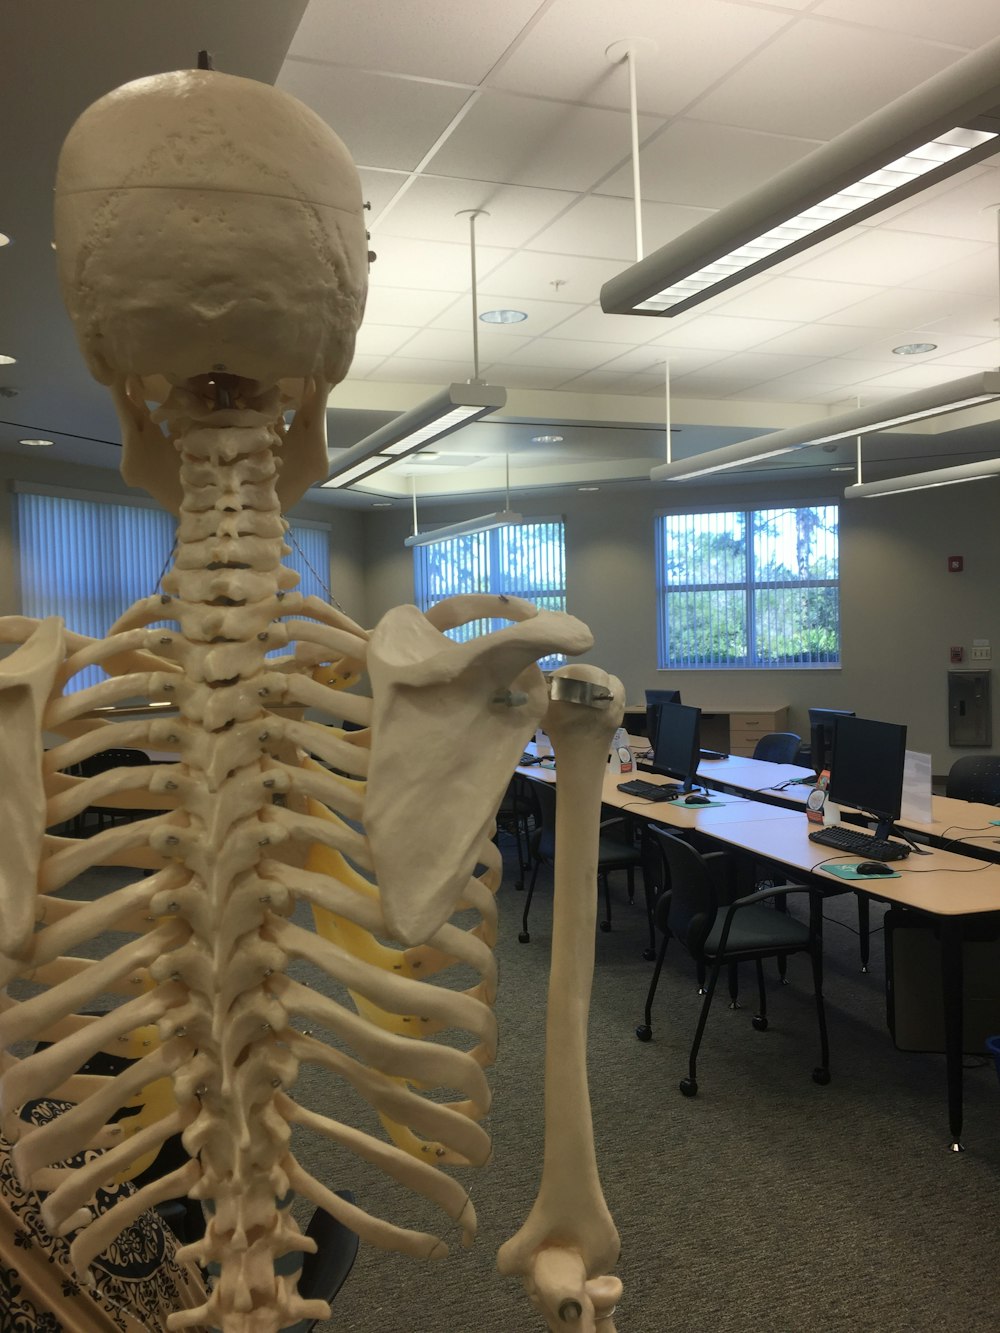 A skeleton in a classroom.